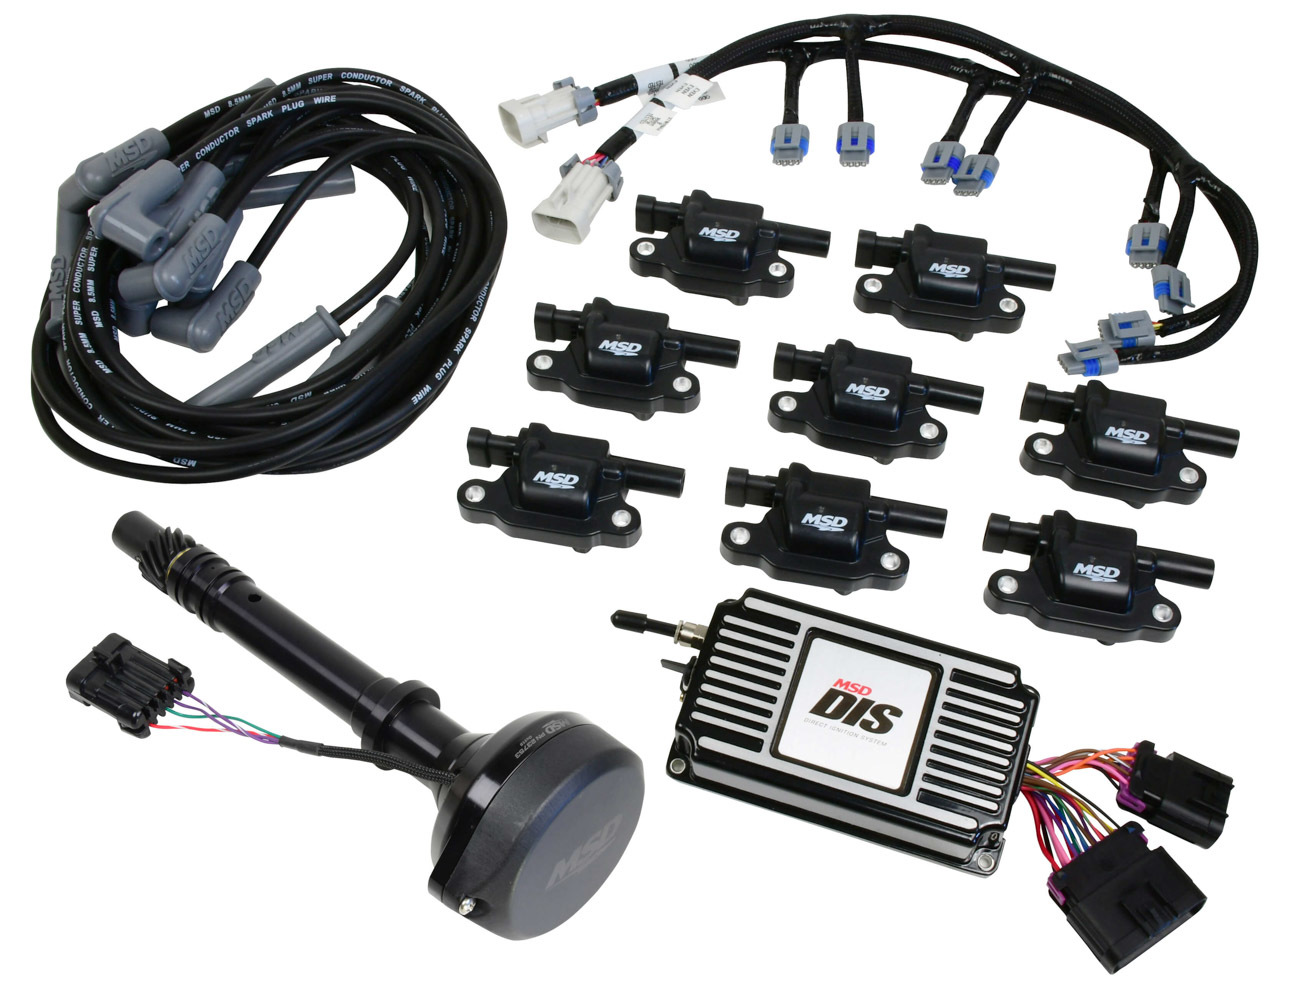 MSD Ignition 601513 Ignition System, Control Box / Coil Harness / Distributor / Ignition Coils / Spark Plug Wires, Chevy V8, Kit